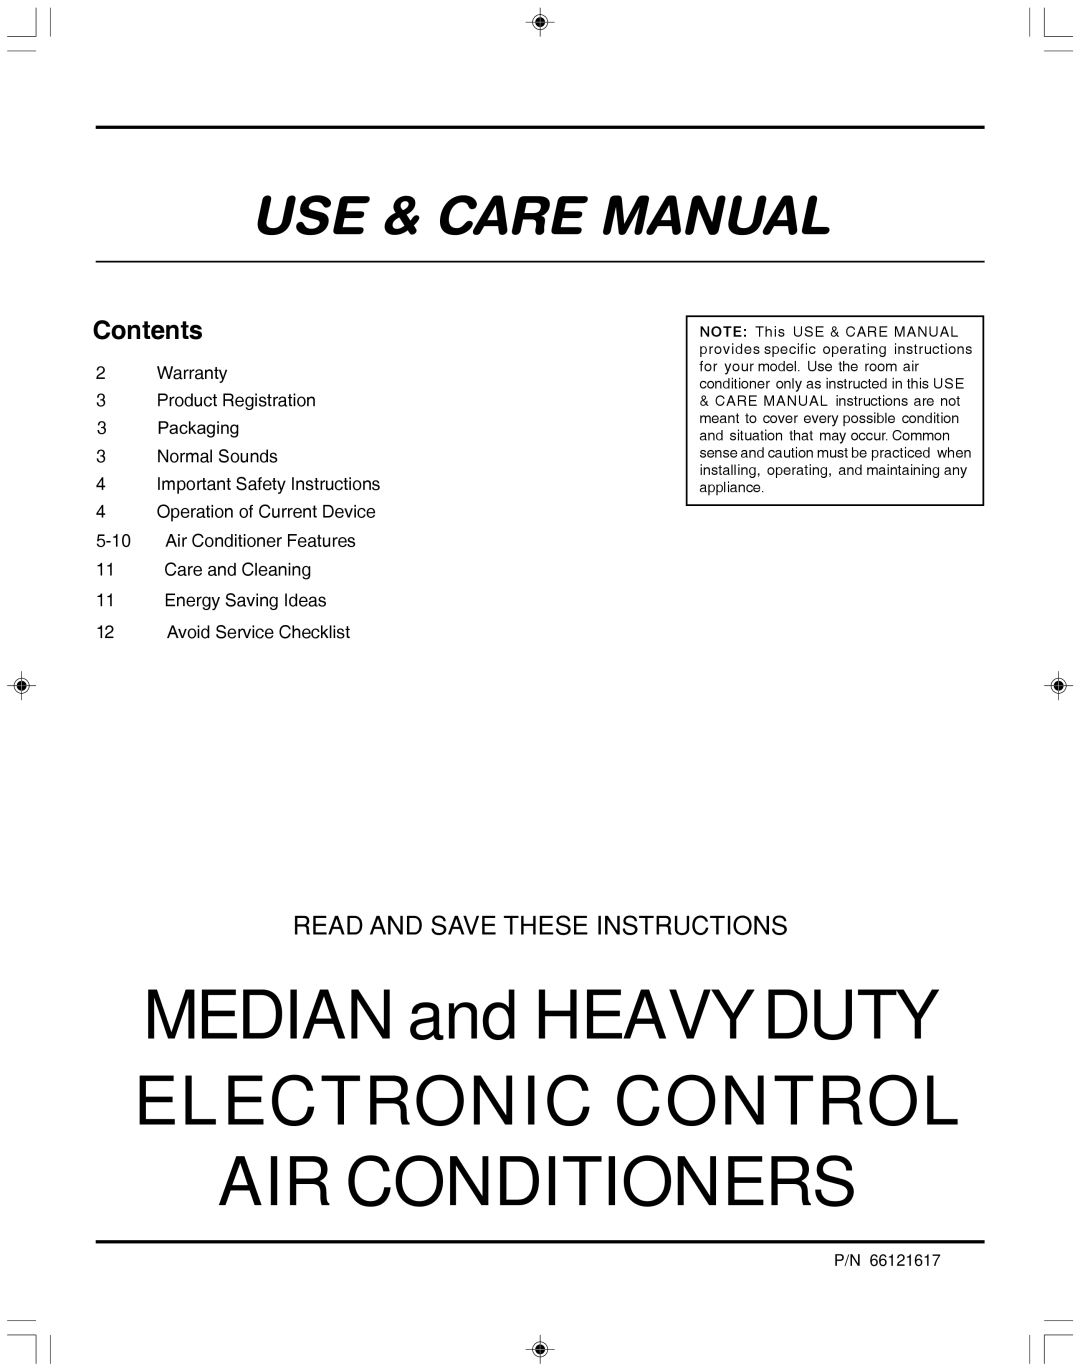 Frigidaire P/N 66121617 warranty Contents, MEDIAN and HEAVY DUTY ELECTRONIC CONTROL AIR CONDITIONERS, Use & Care Manual 